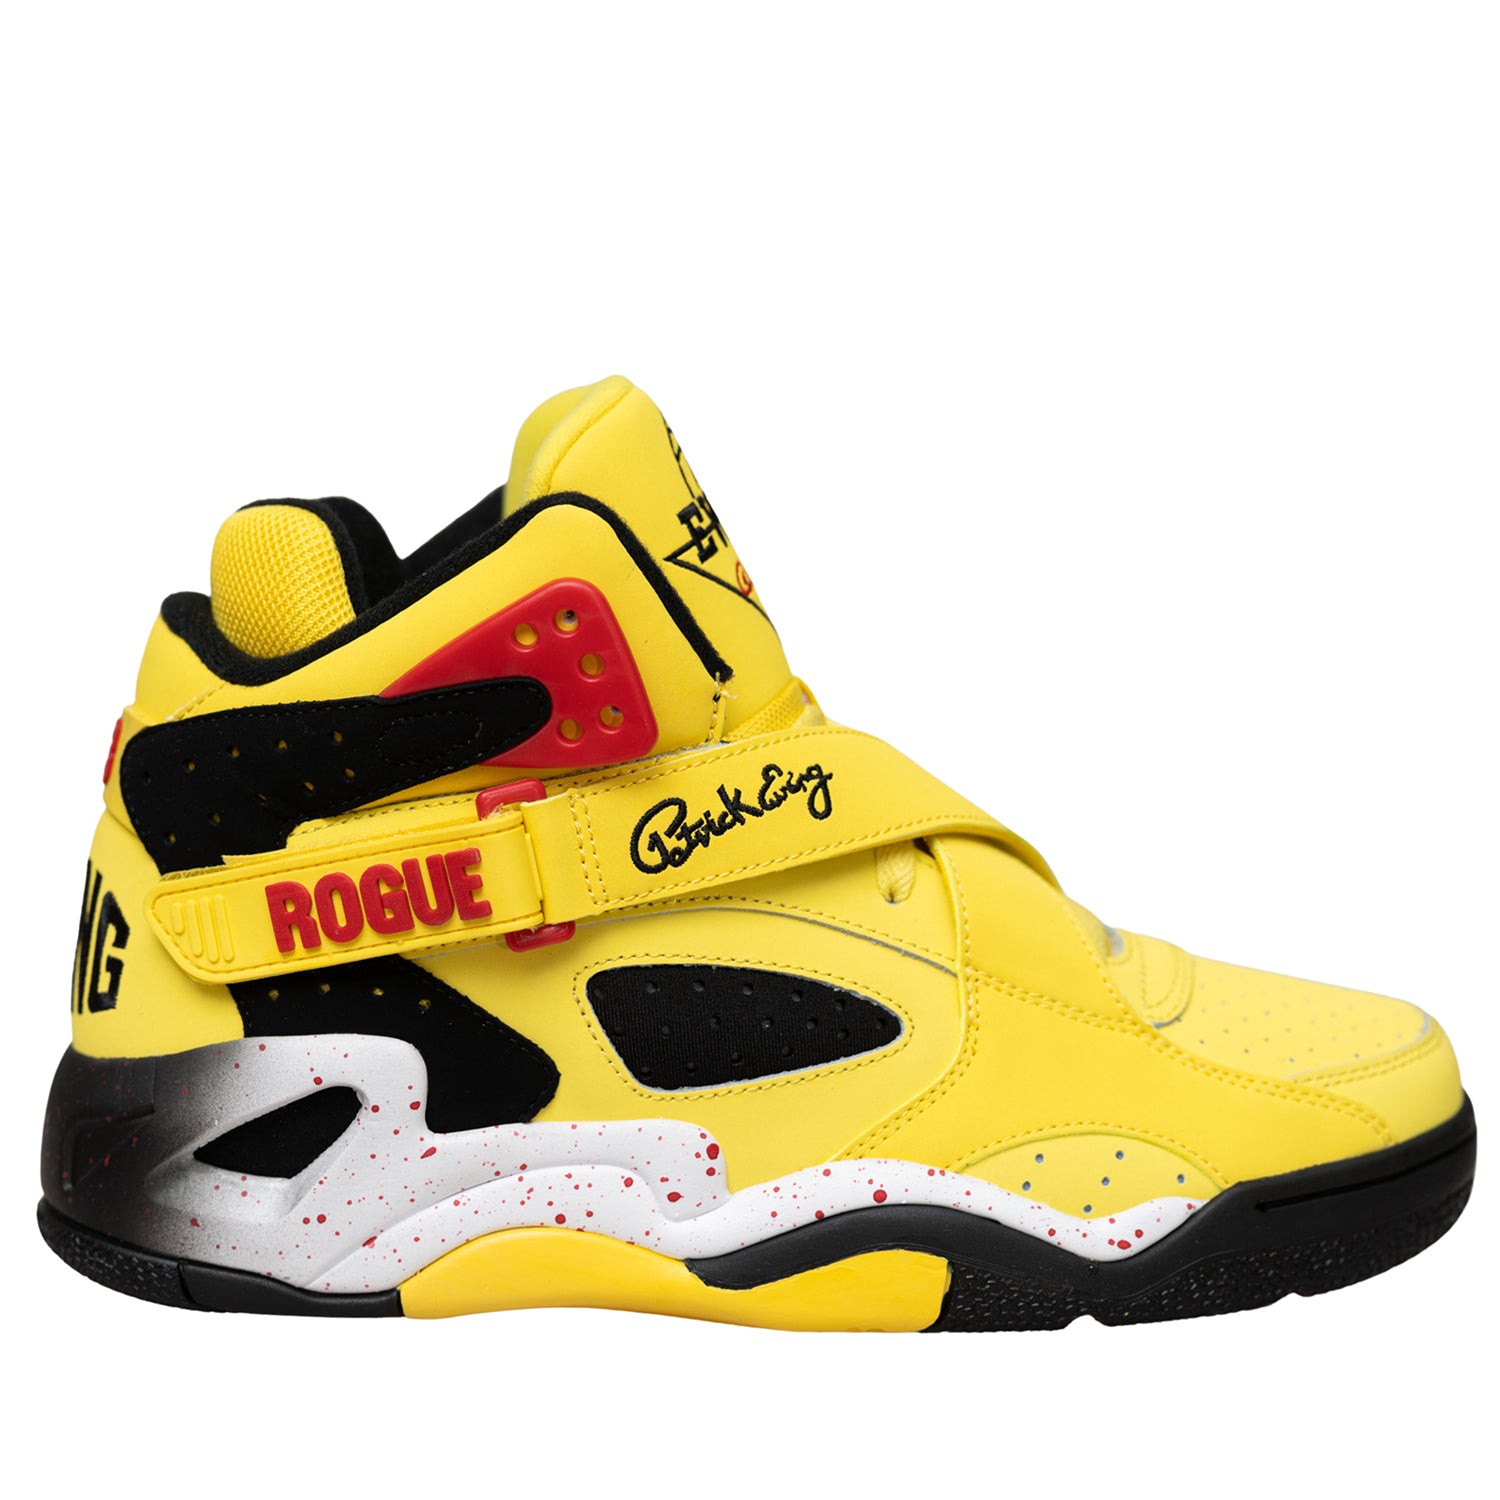 ROGUE Yellow/Black/Red